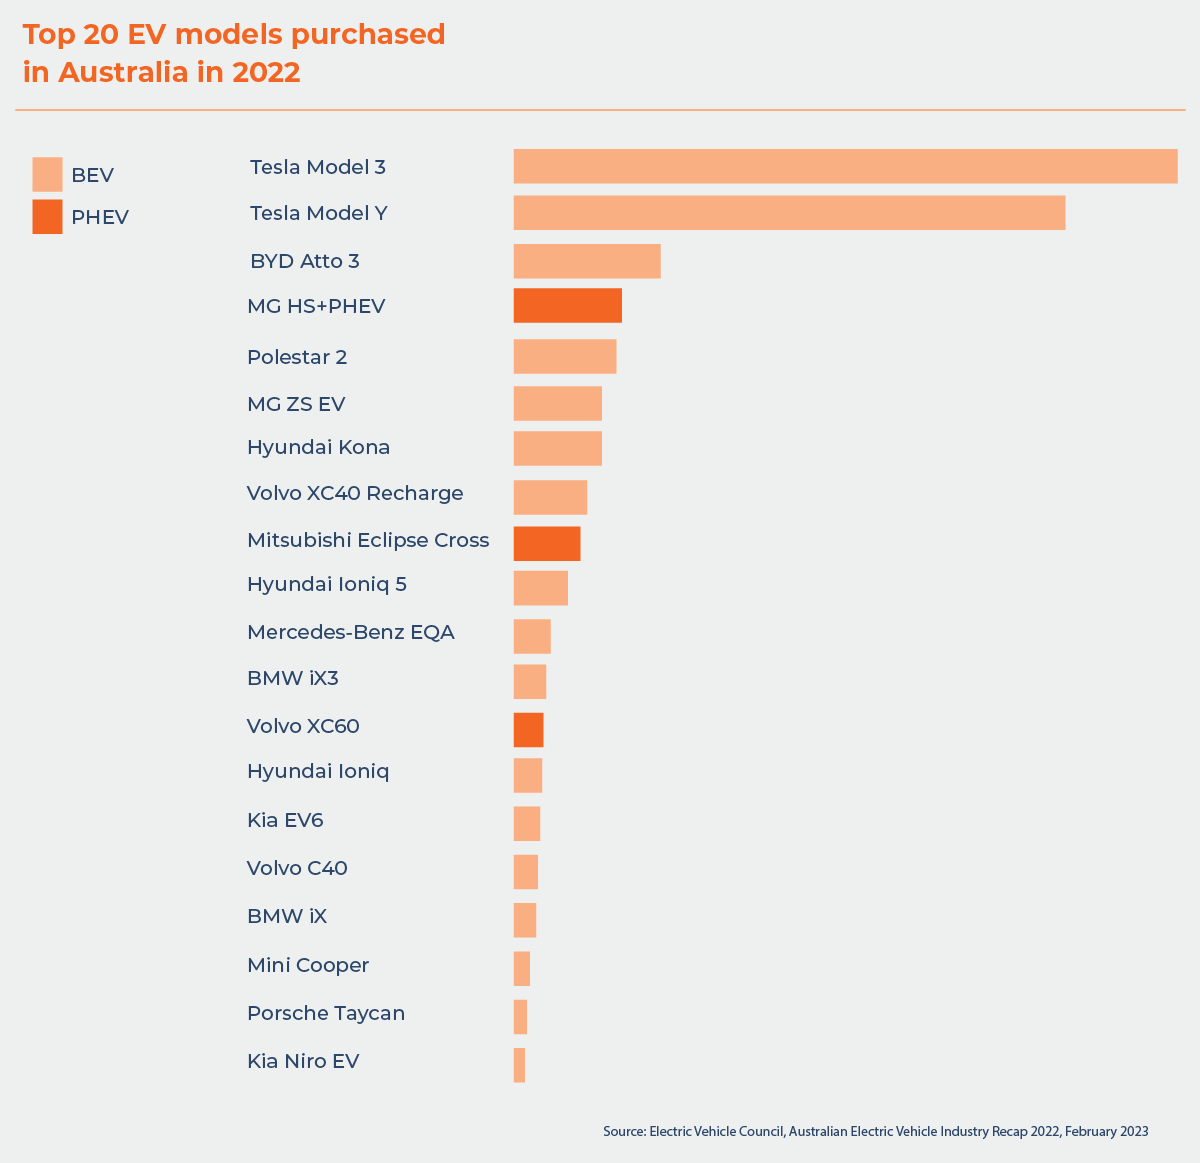 Top 20 electric vehicle models purchased in Australia in 2022